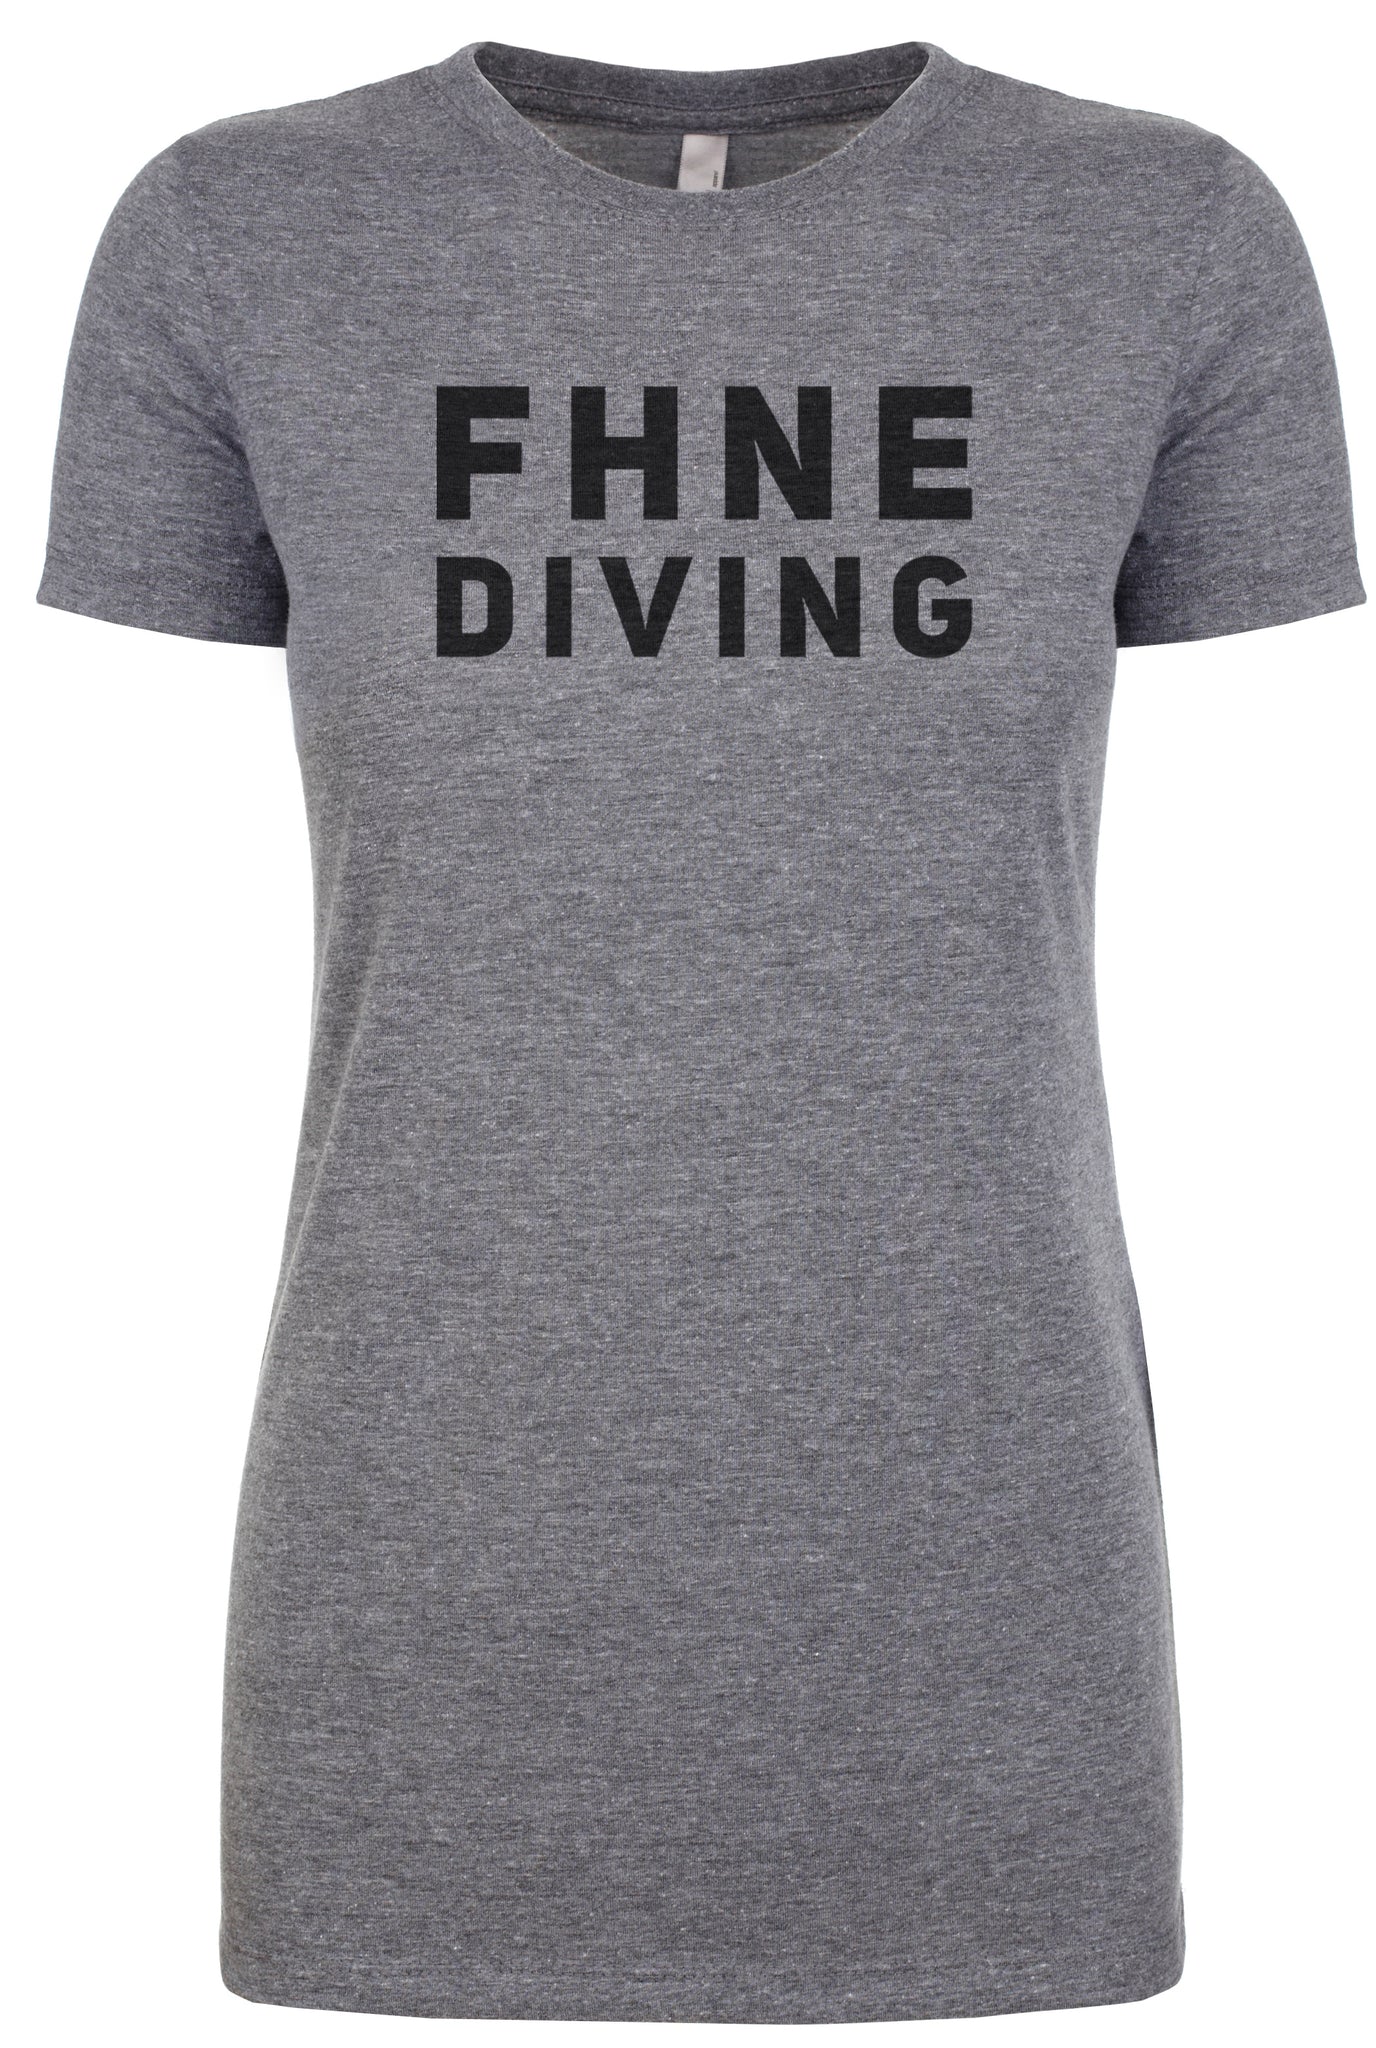 FHNE DIVING Basic Graphic *CHOOSE YOUR GRAPHIC*